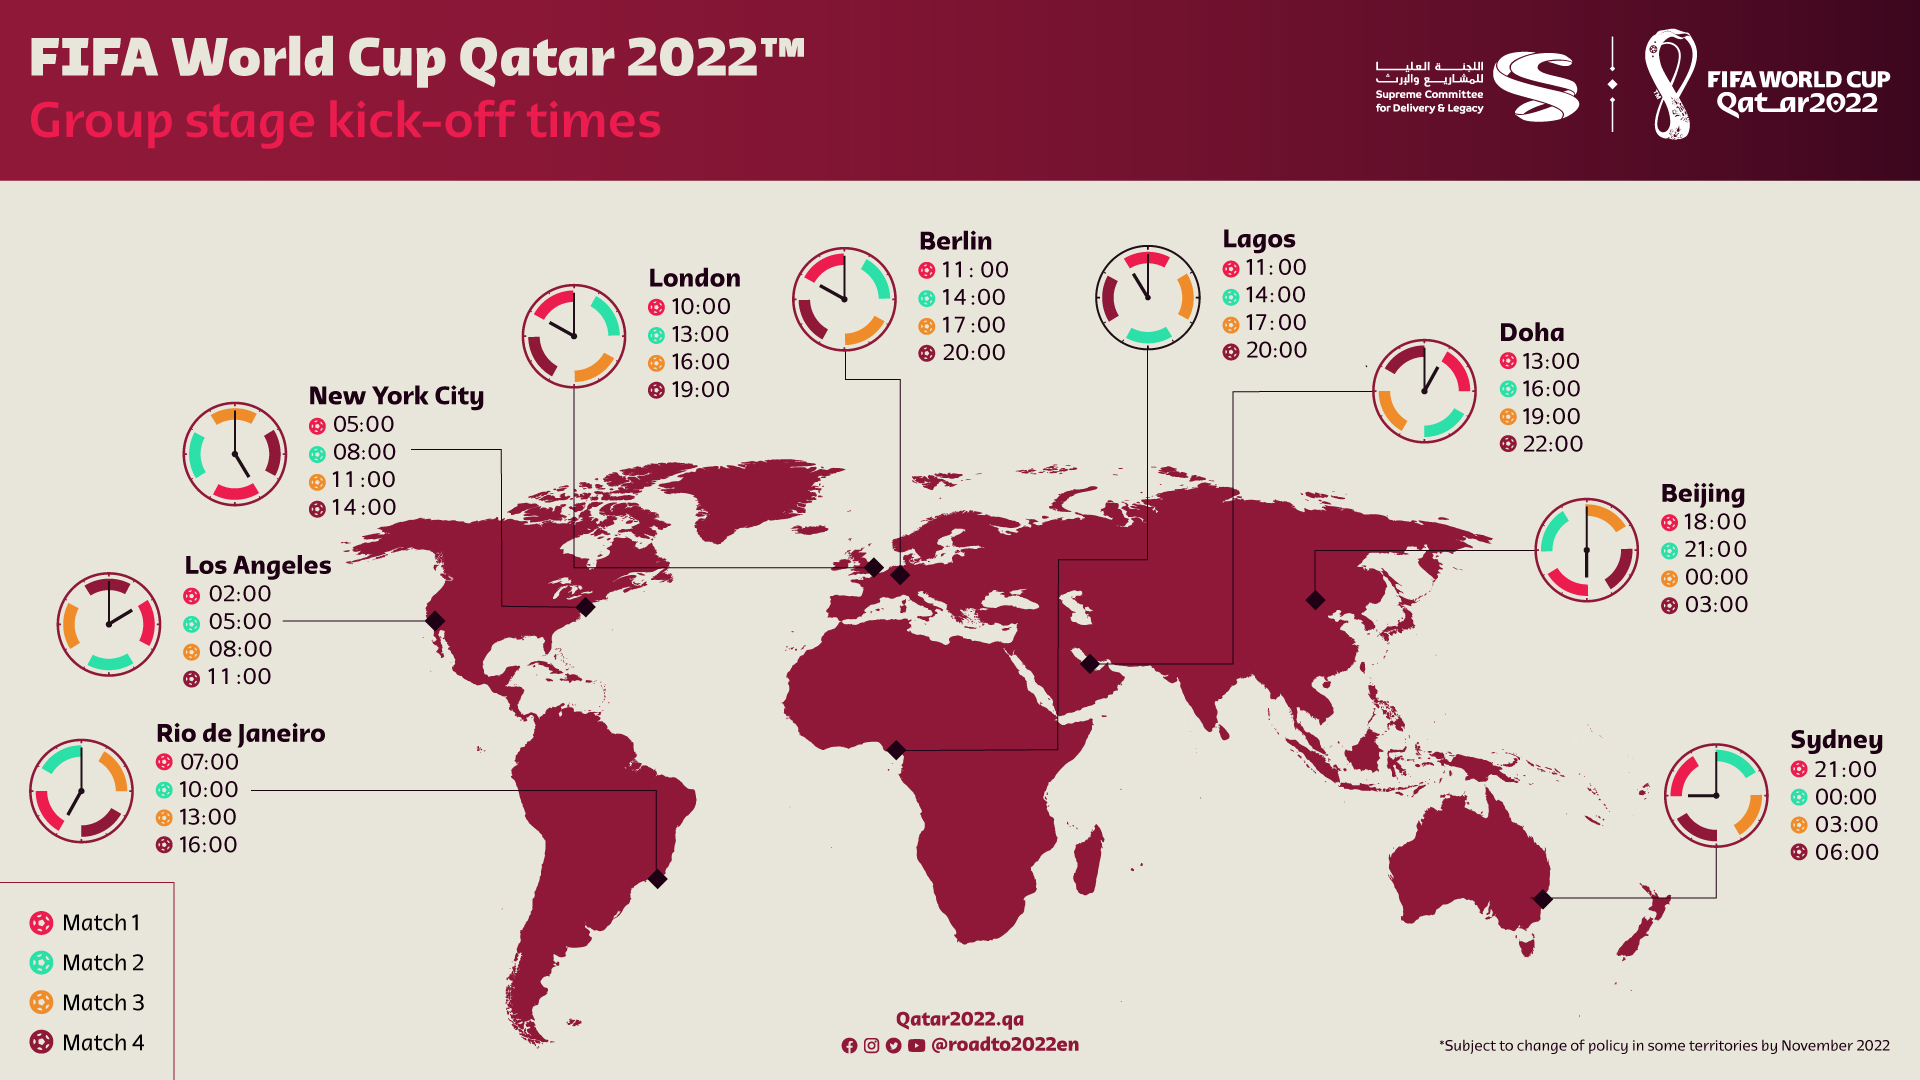 Fifa International Match Calendar 2022 Complete Guide To 2022 World Cup: Fixtures, Stadiums And Tickets - Cgtn